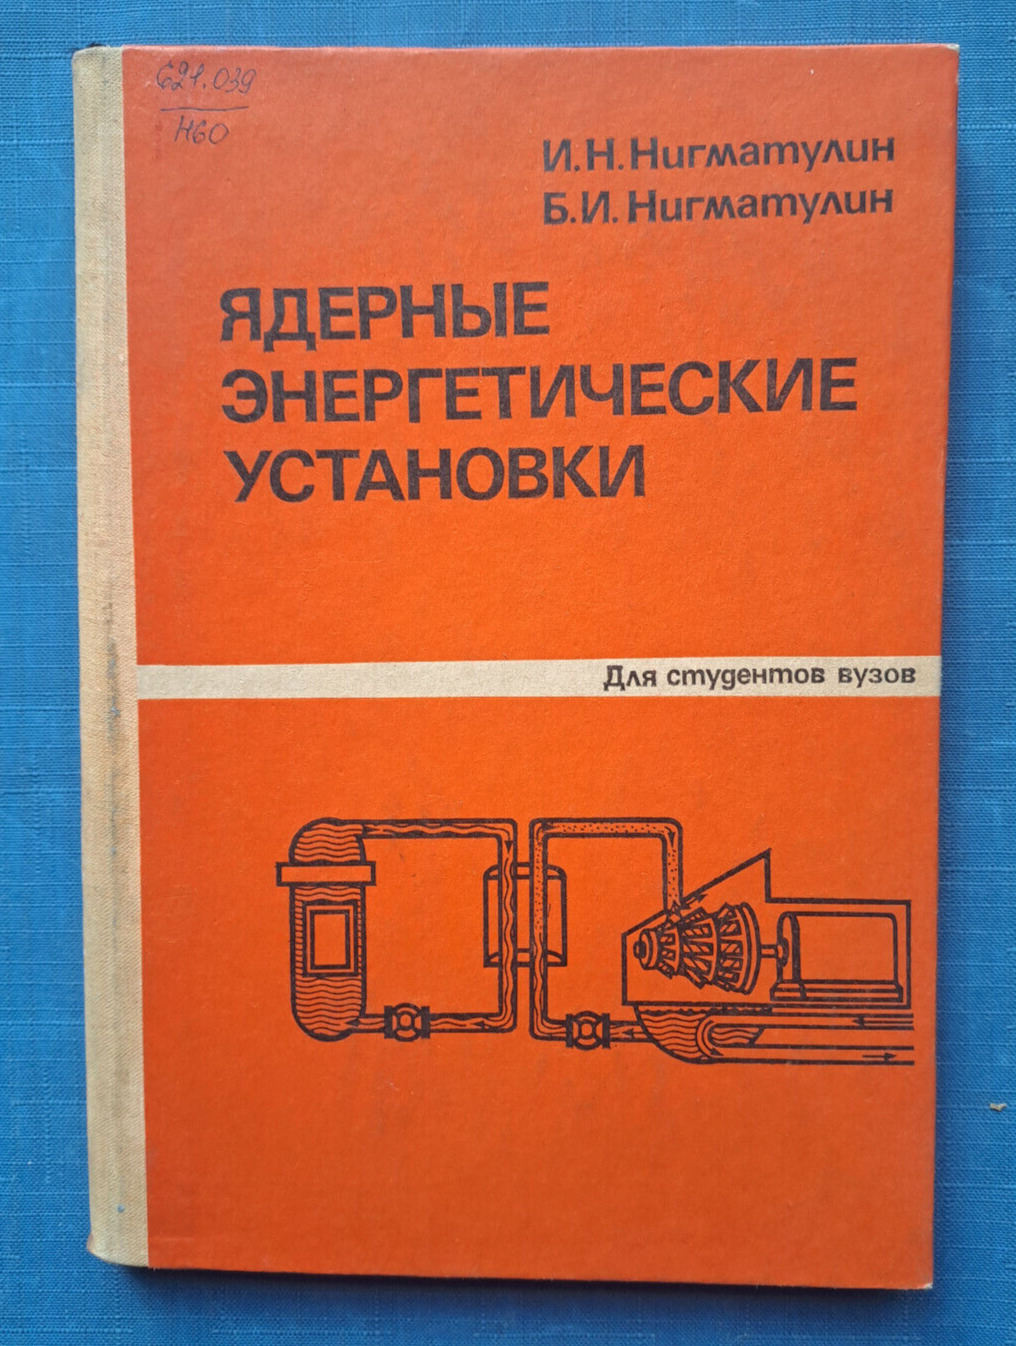 1986 Nuclear power plants station NPP Reactor 4200 only textbook Russian book